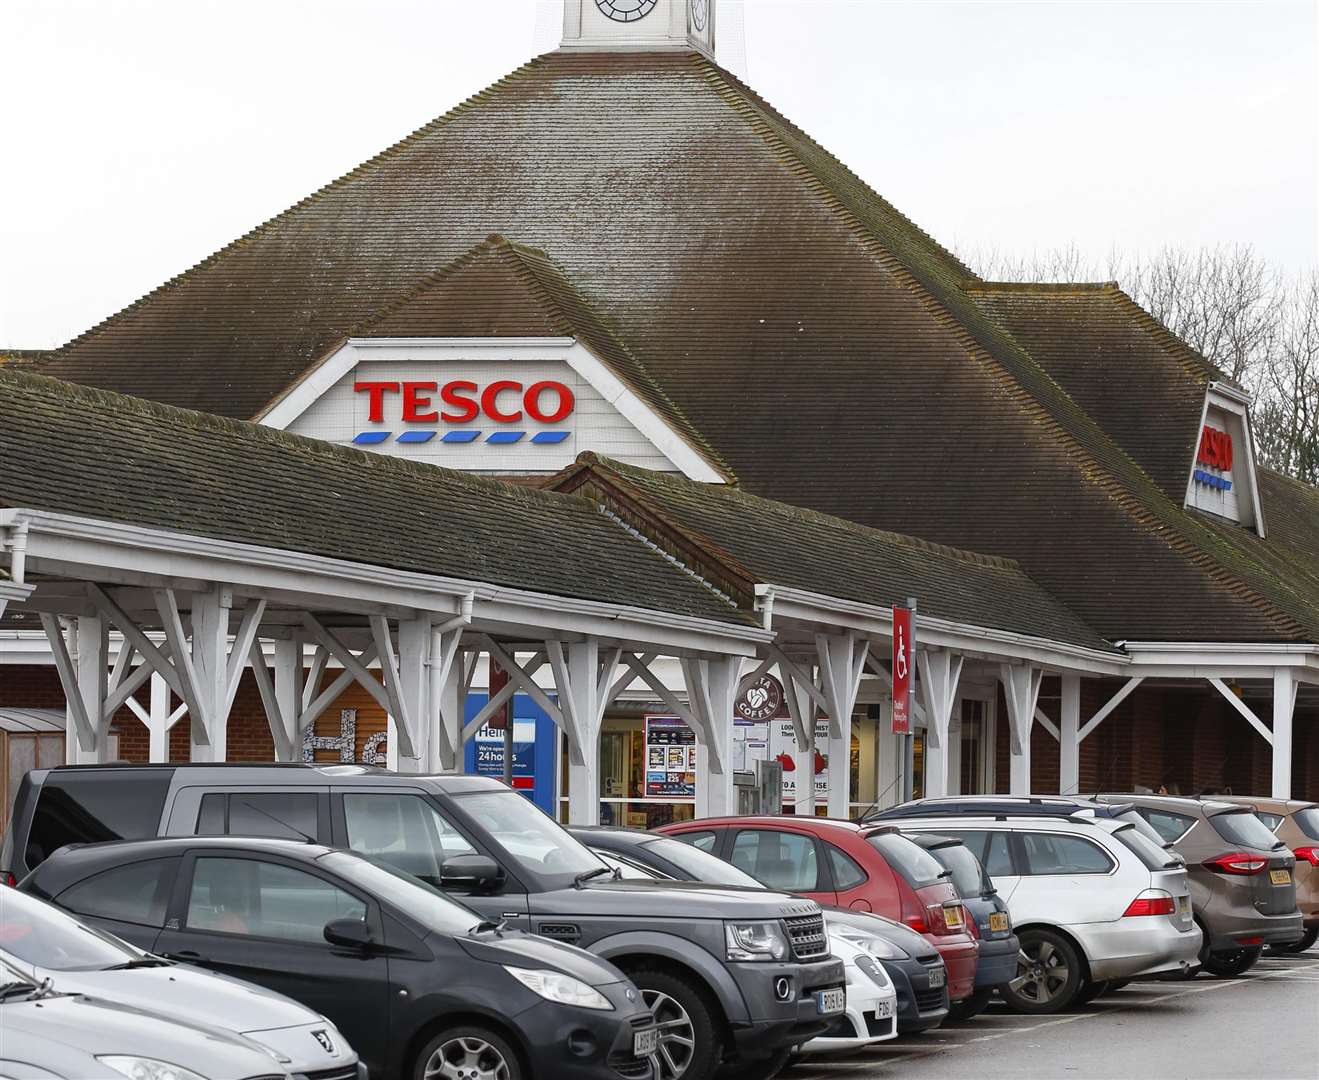 The incident took place outside Tesco in Grove Green